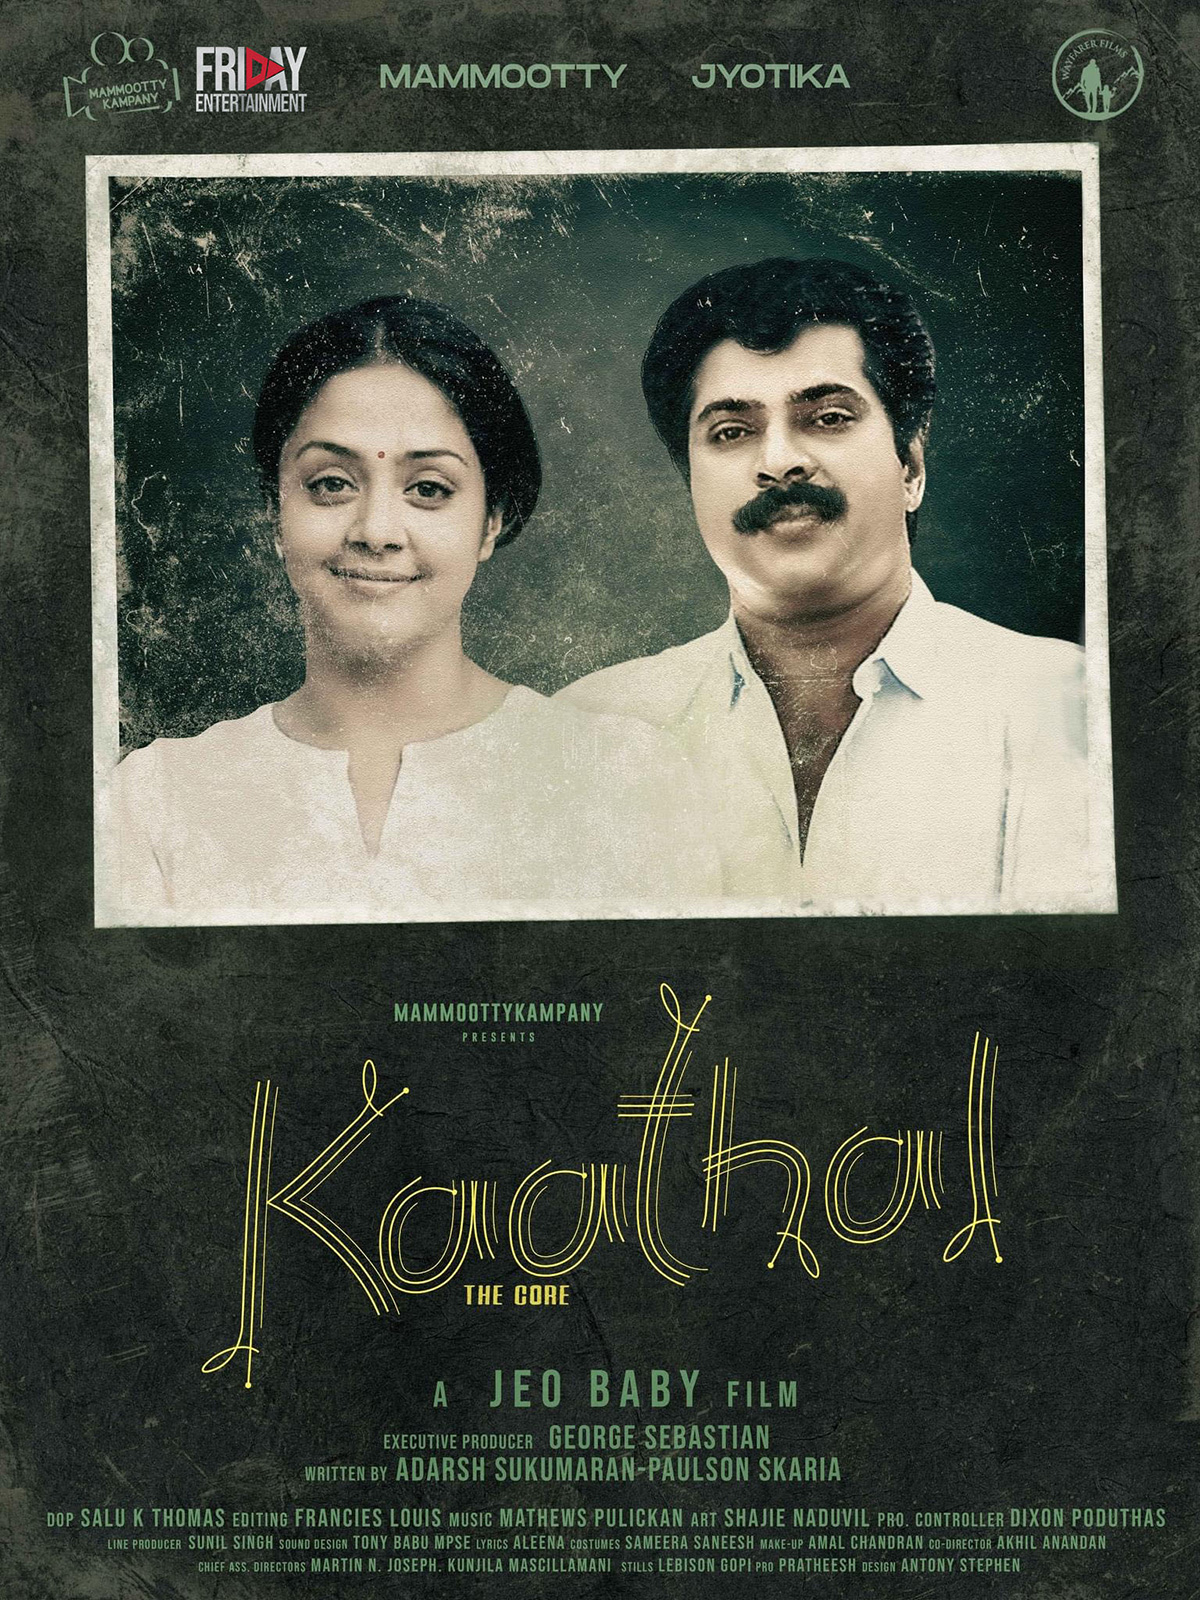 Kaathal - The Core streaming vf gratuit